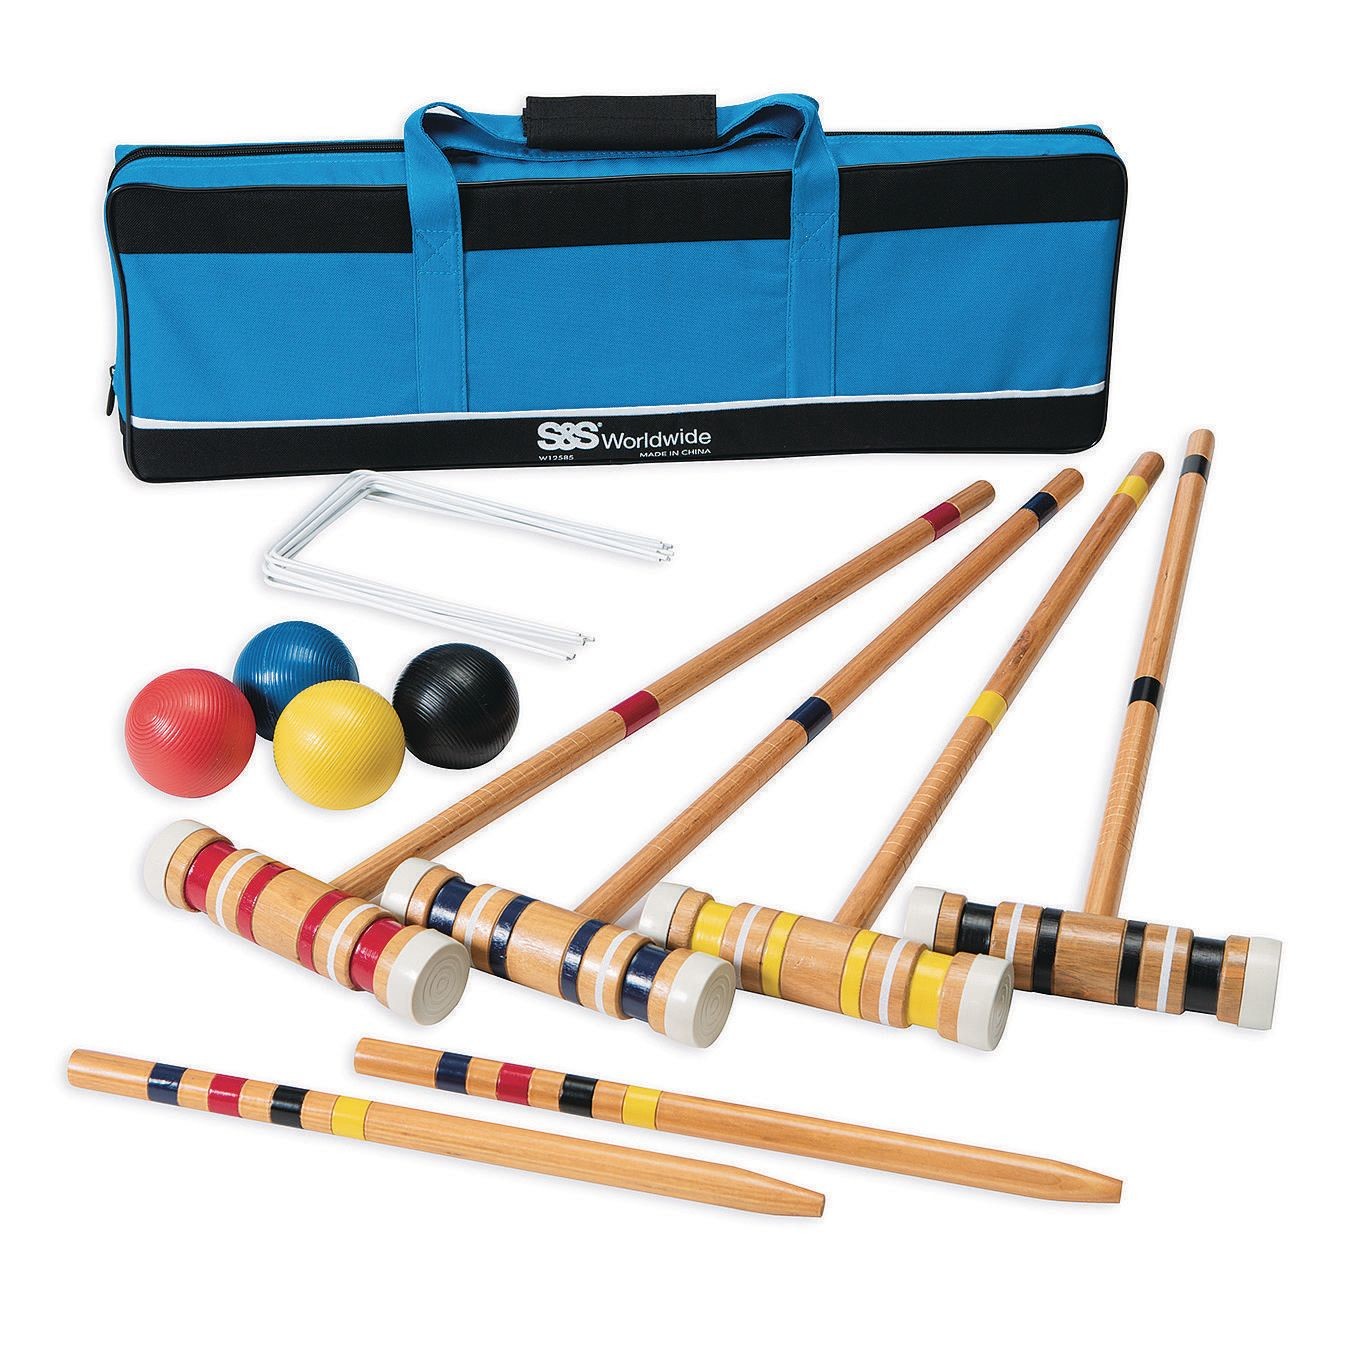 4-Player Recreational S&S Worldwide at Set Buy Croquet